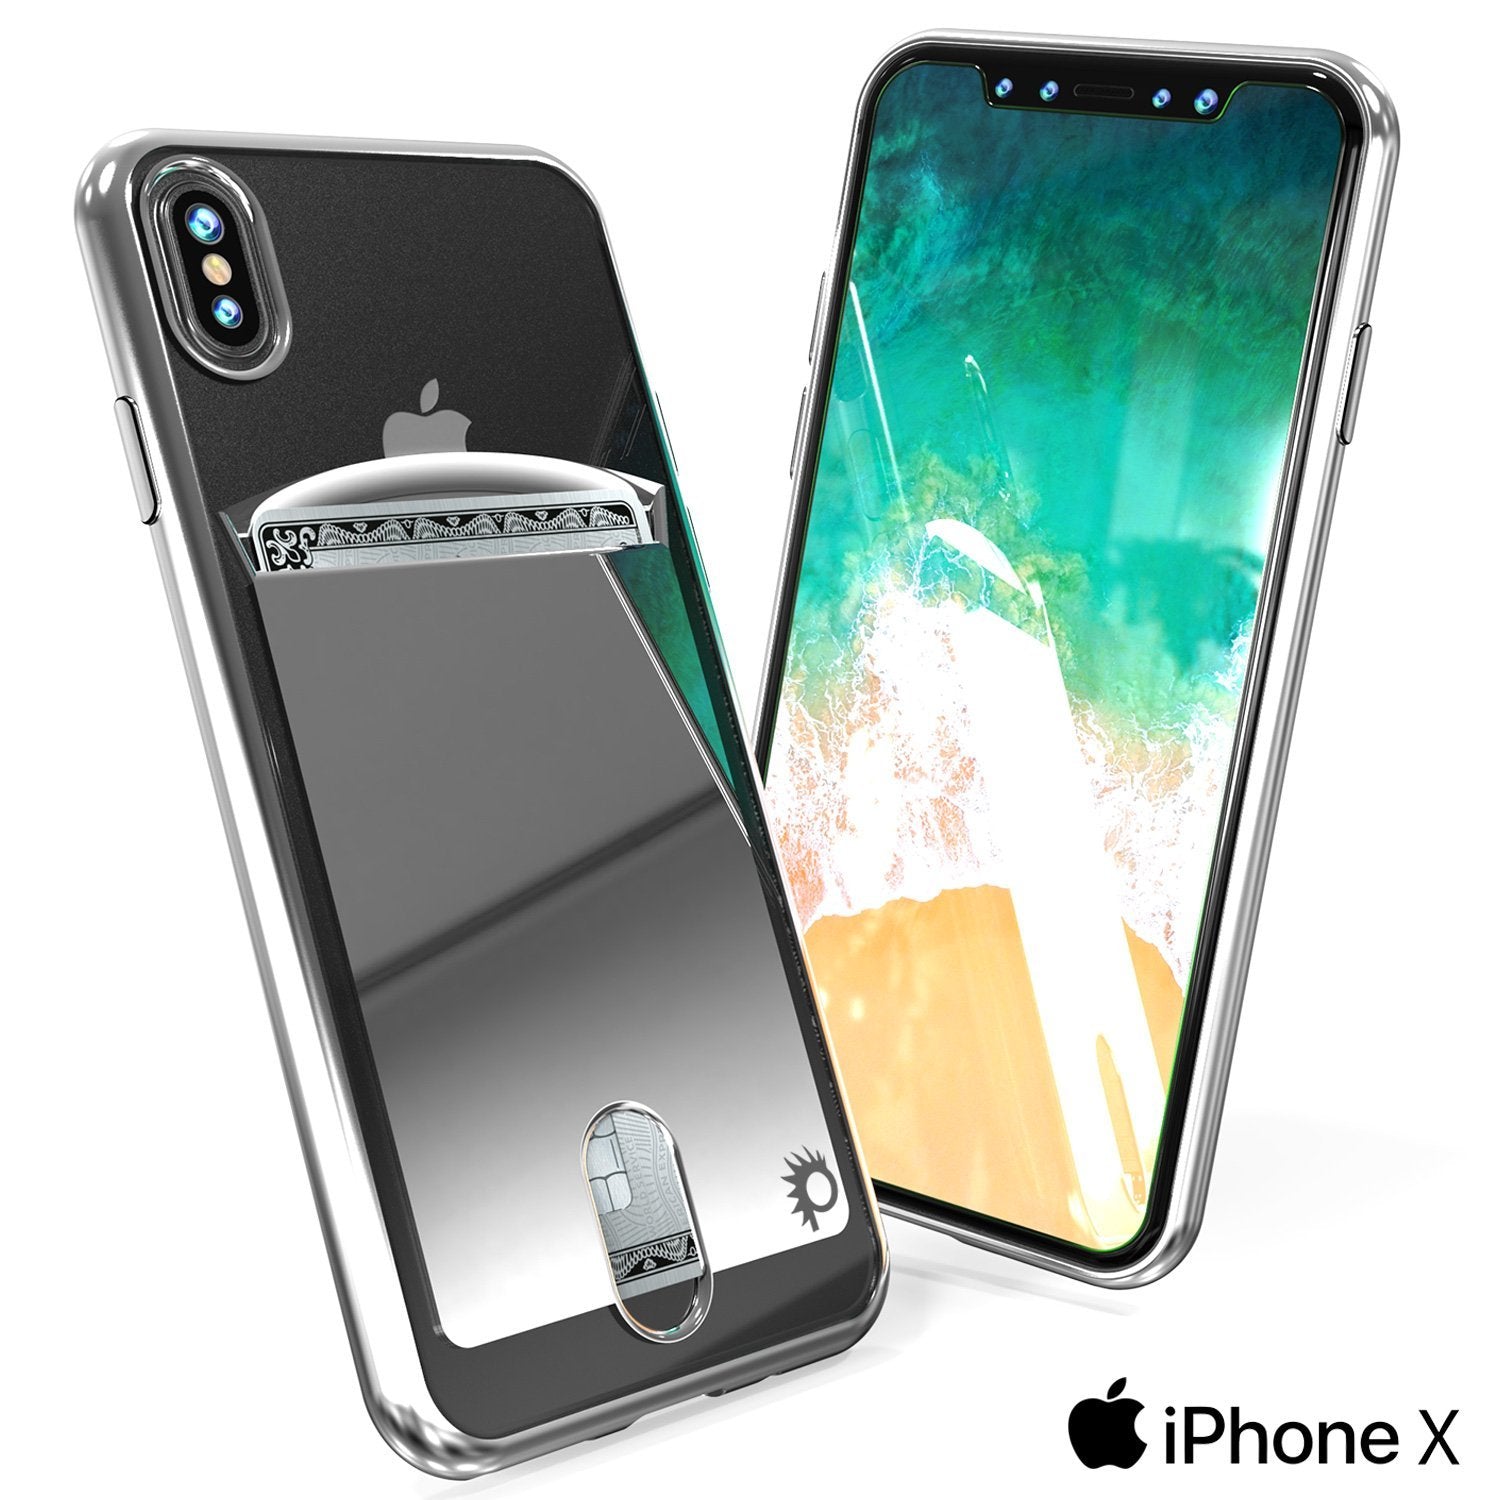 iPhone X Case, PUNKcase [LUCID Series] Slim Fit Protective Dual Layer Armor Cover W/ Scratch Resistant PUNKSHIELD Screen Protector [SILVER]